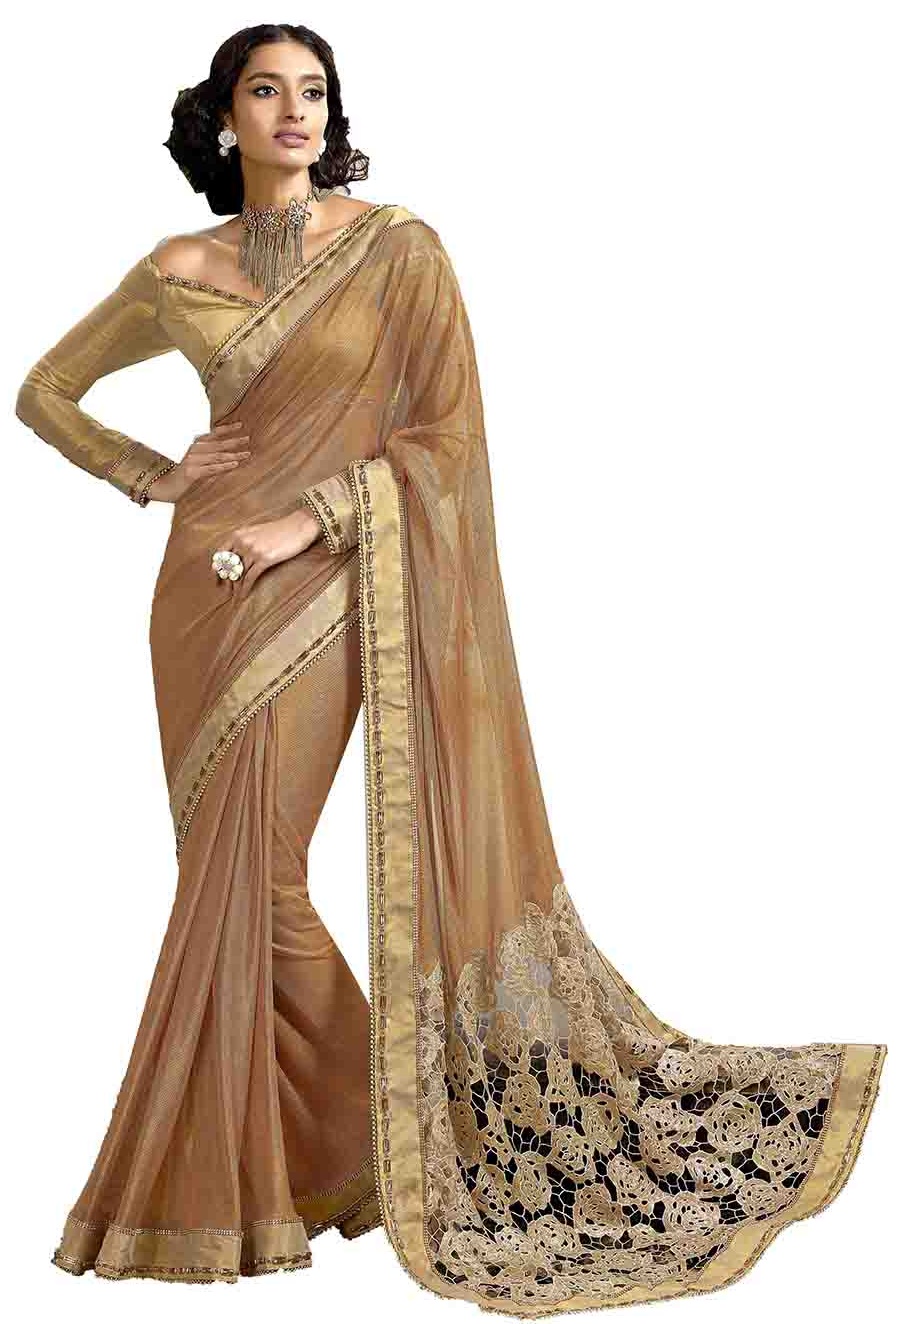 Tips To Wear An Indian Saree During Time of Pregnancy